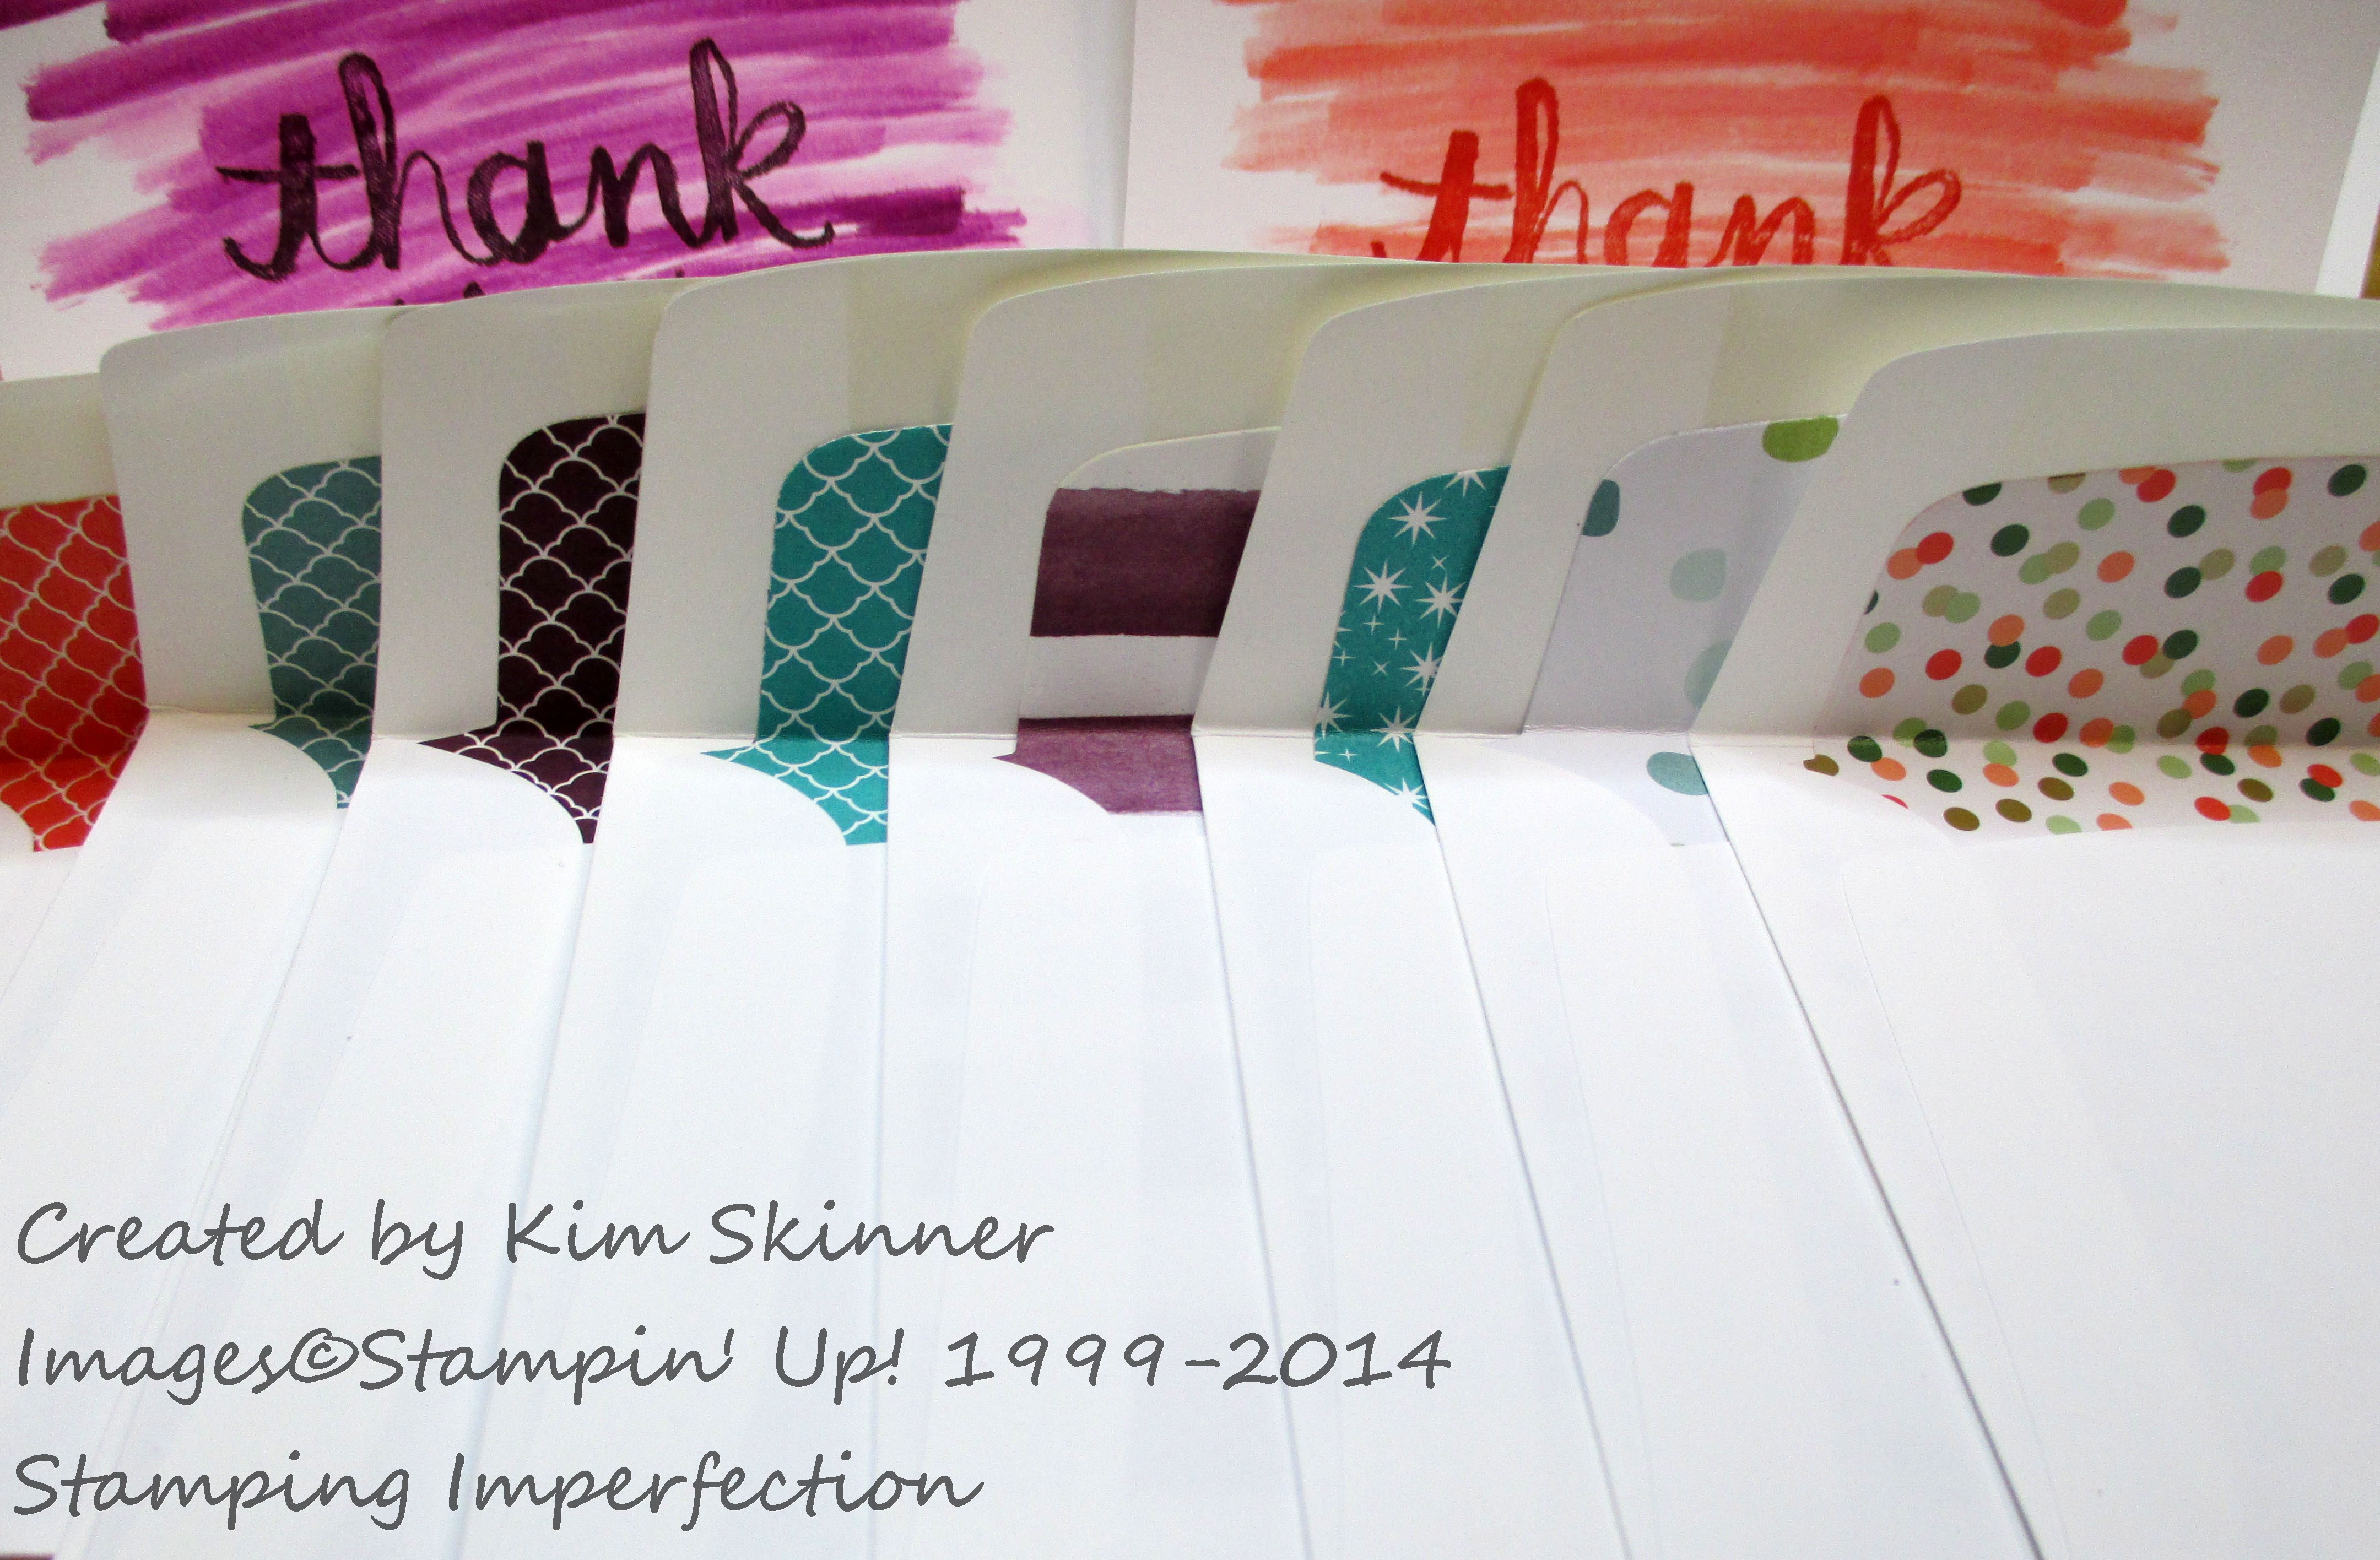 Stamping Imperfection How to use paper scraps and papers you don't love.